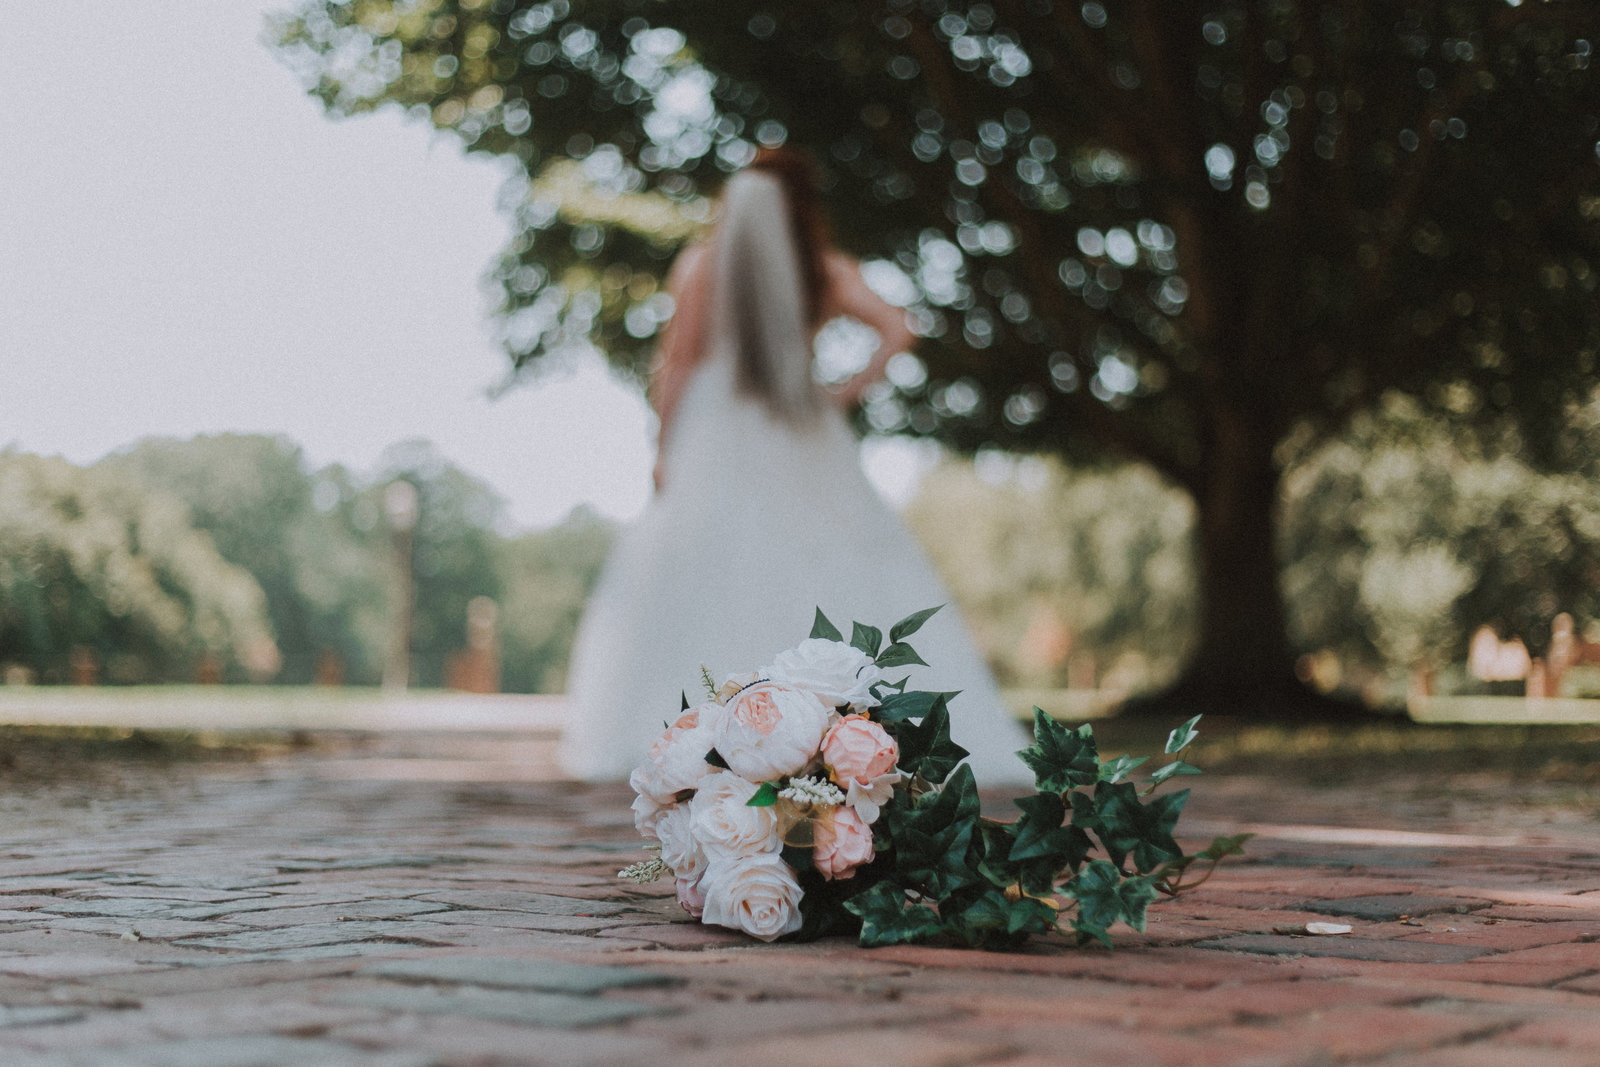 Bridal Portraits at Pate Chapel, William and Mary